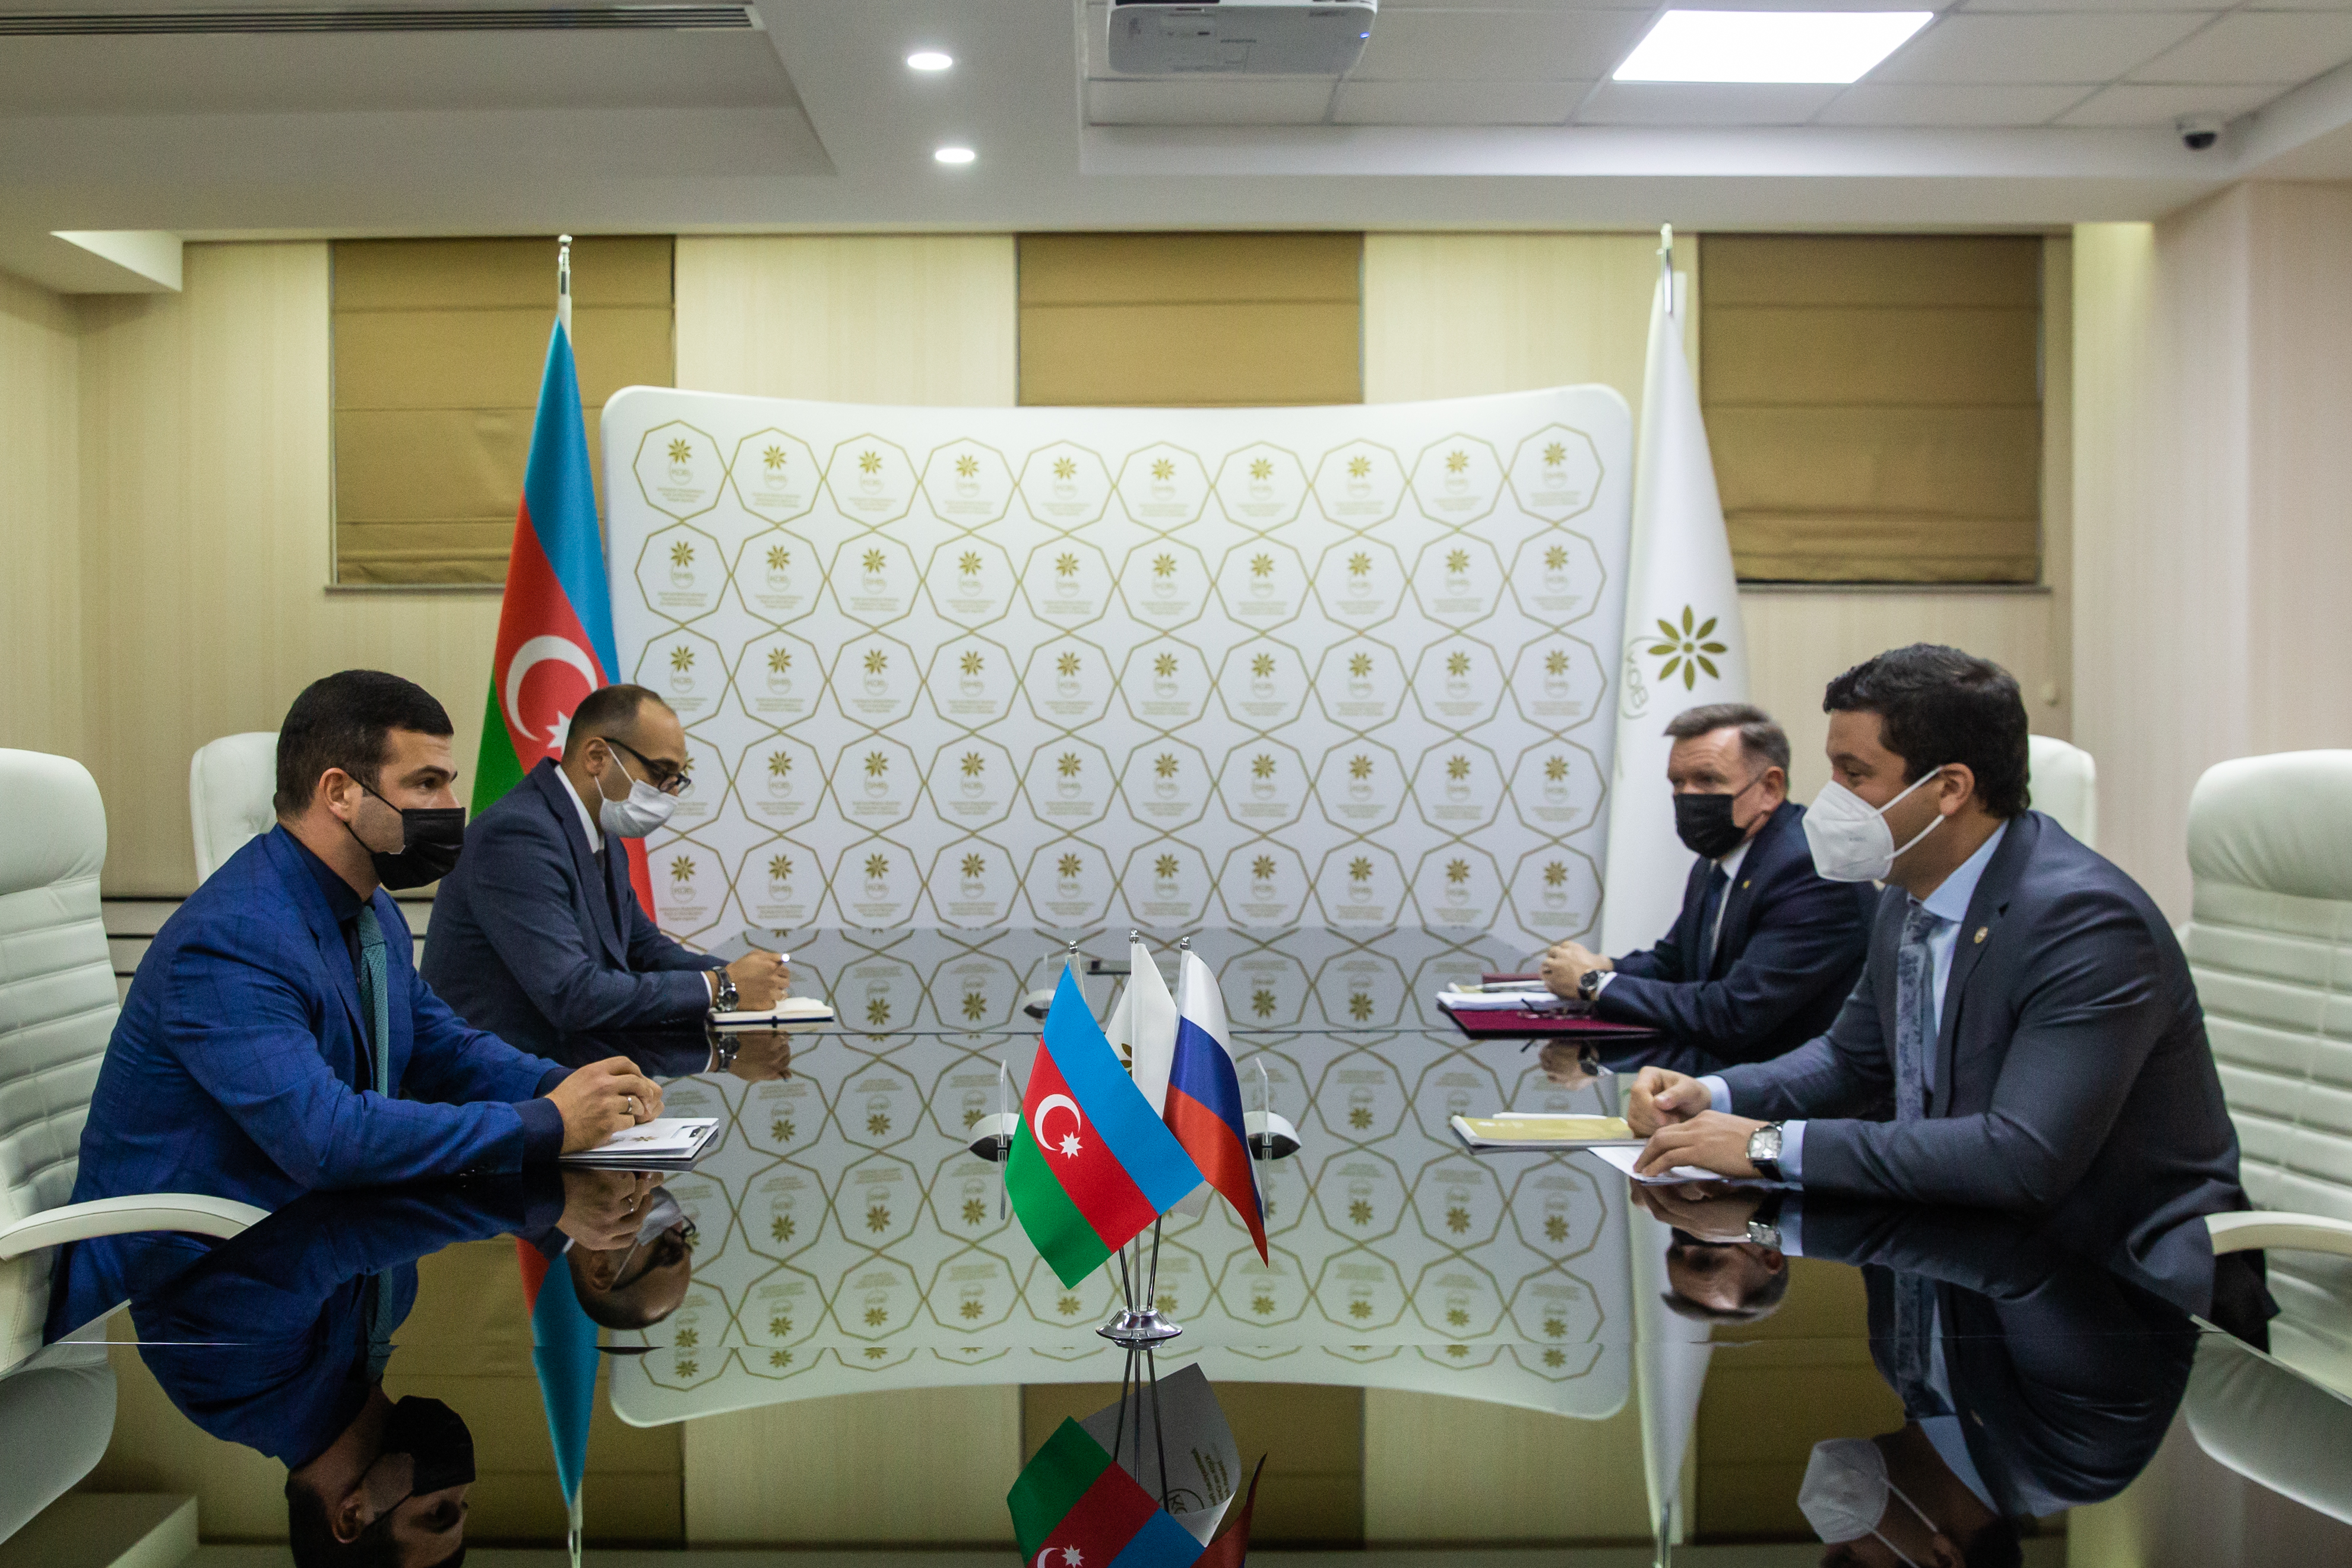 A meeting with the permanent representative of Tatarstan in Azerbaijan was held 